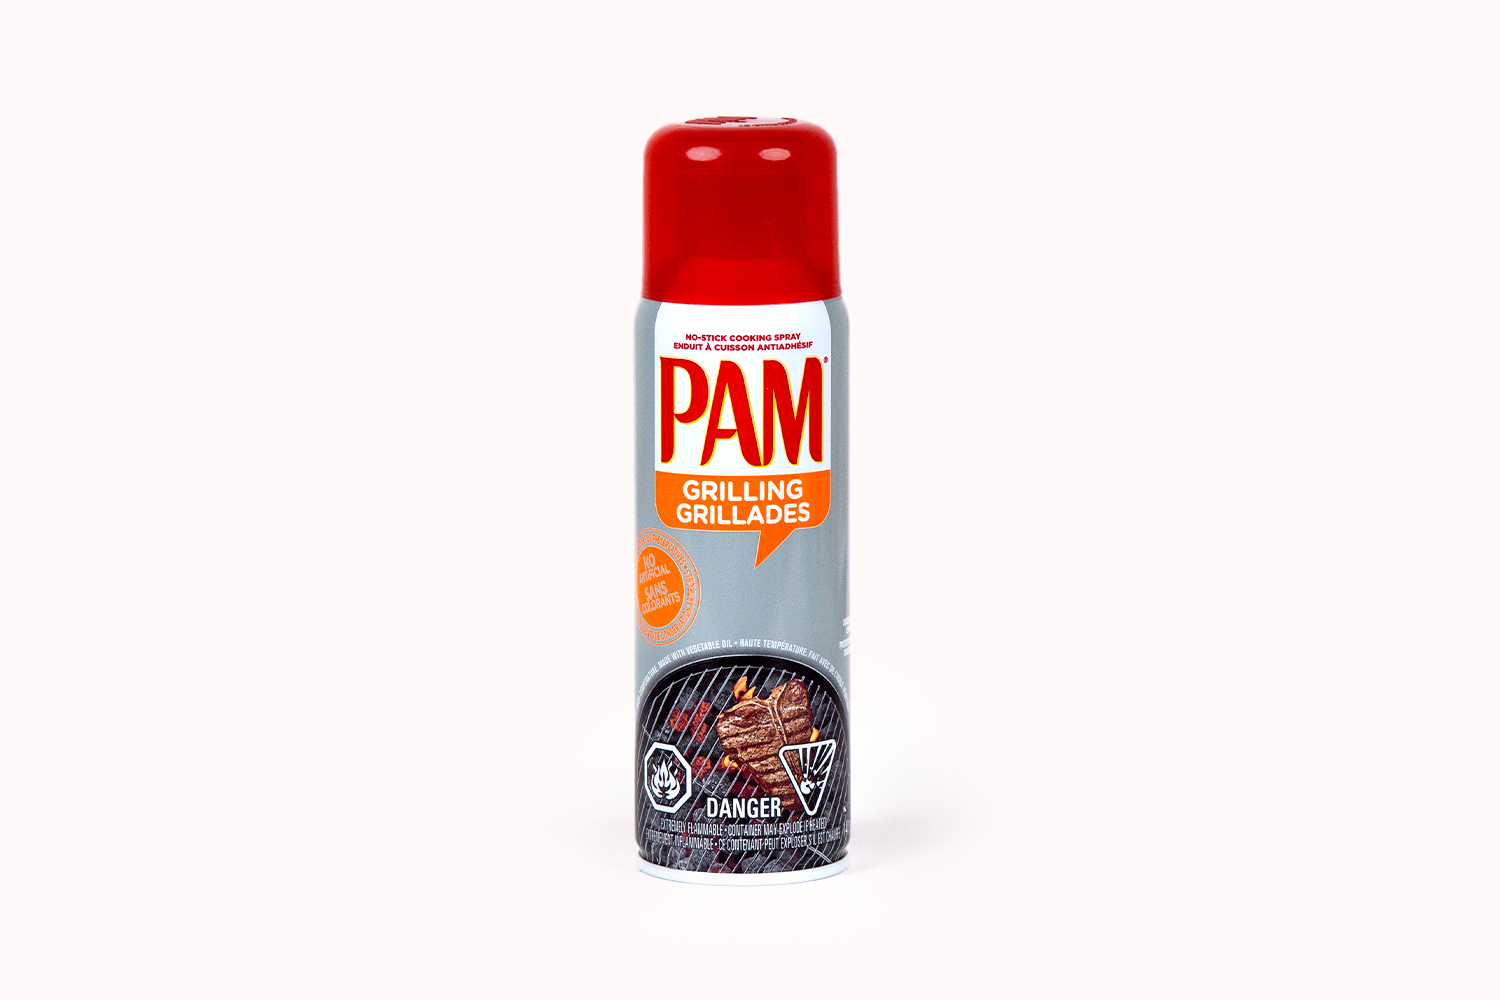 Pam Grilling Grillades Cooking Spray